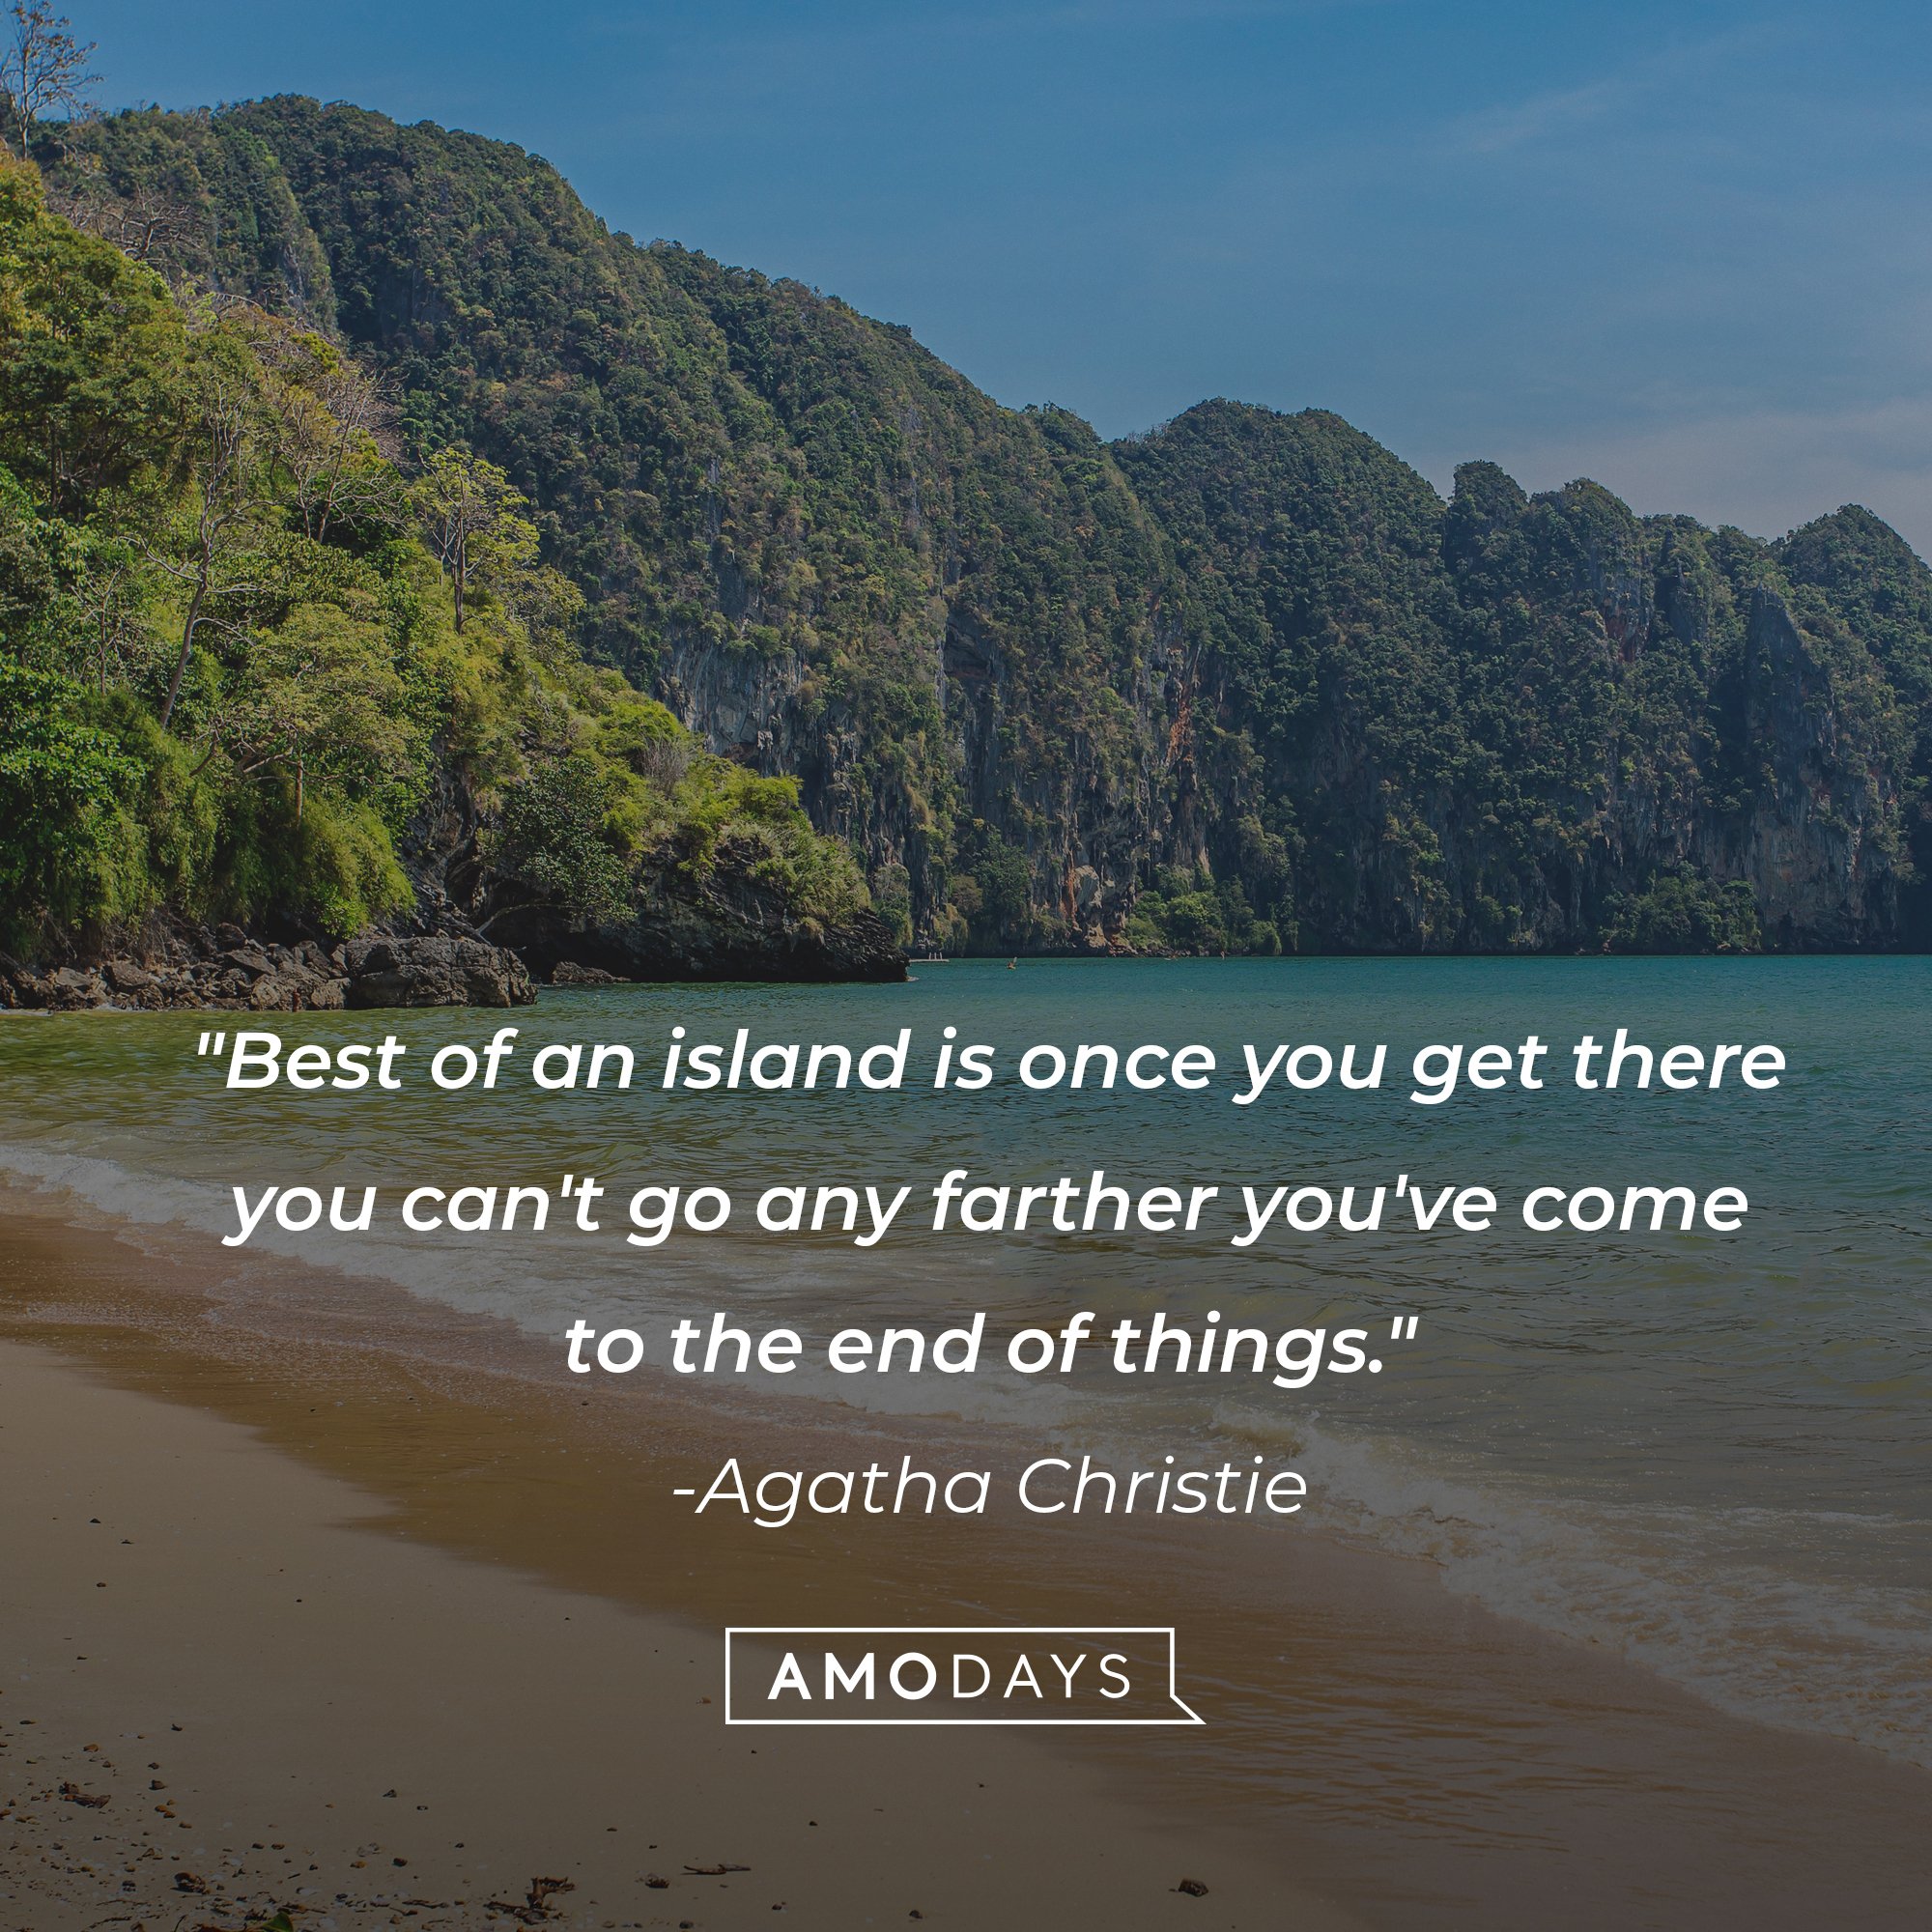 Agatha Christie's quote: "Best of an island is once you get there  you can't go any farther you've come to the end of things." | Image: AmoDays